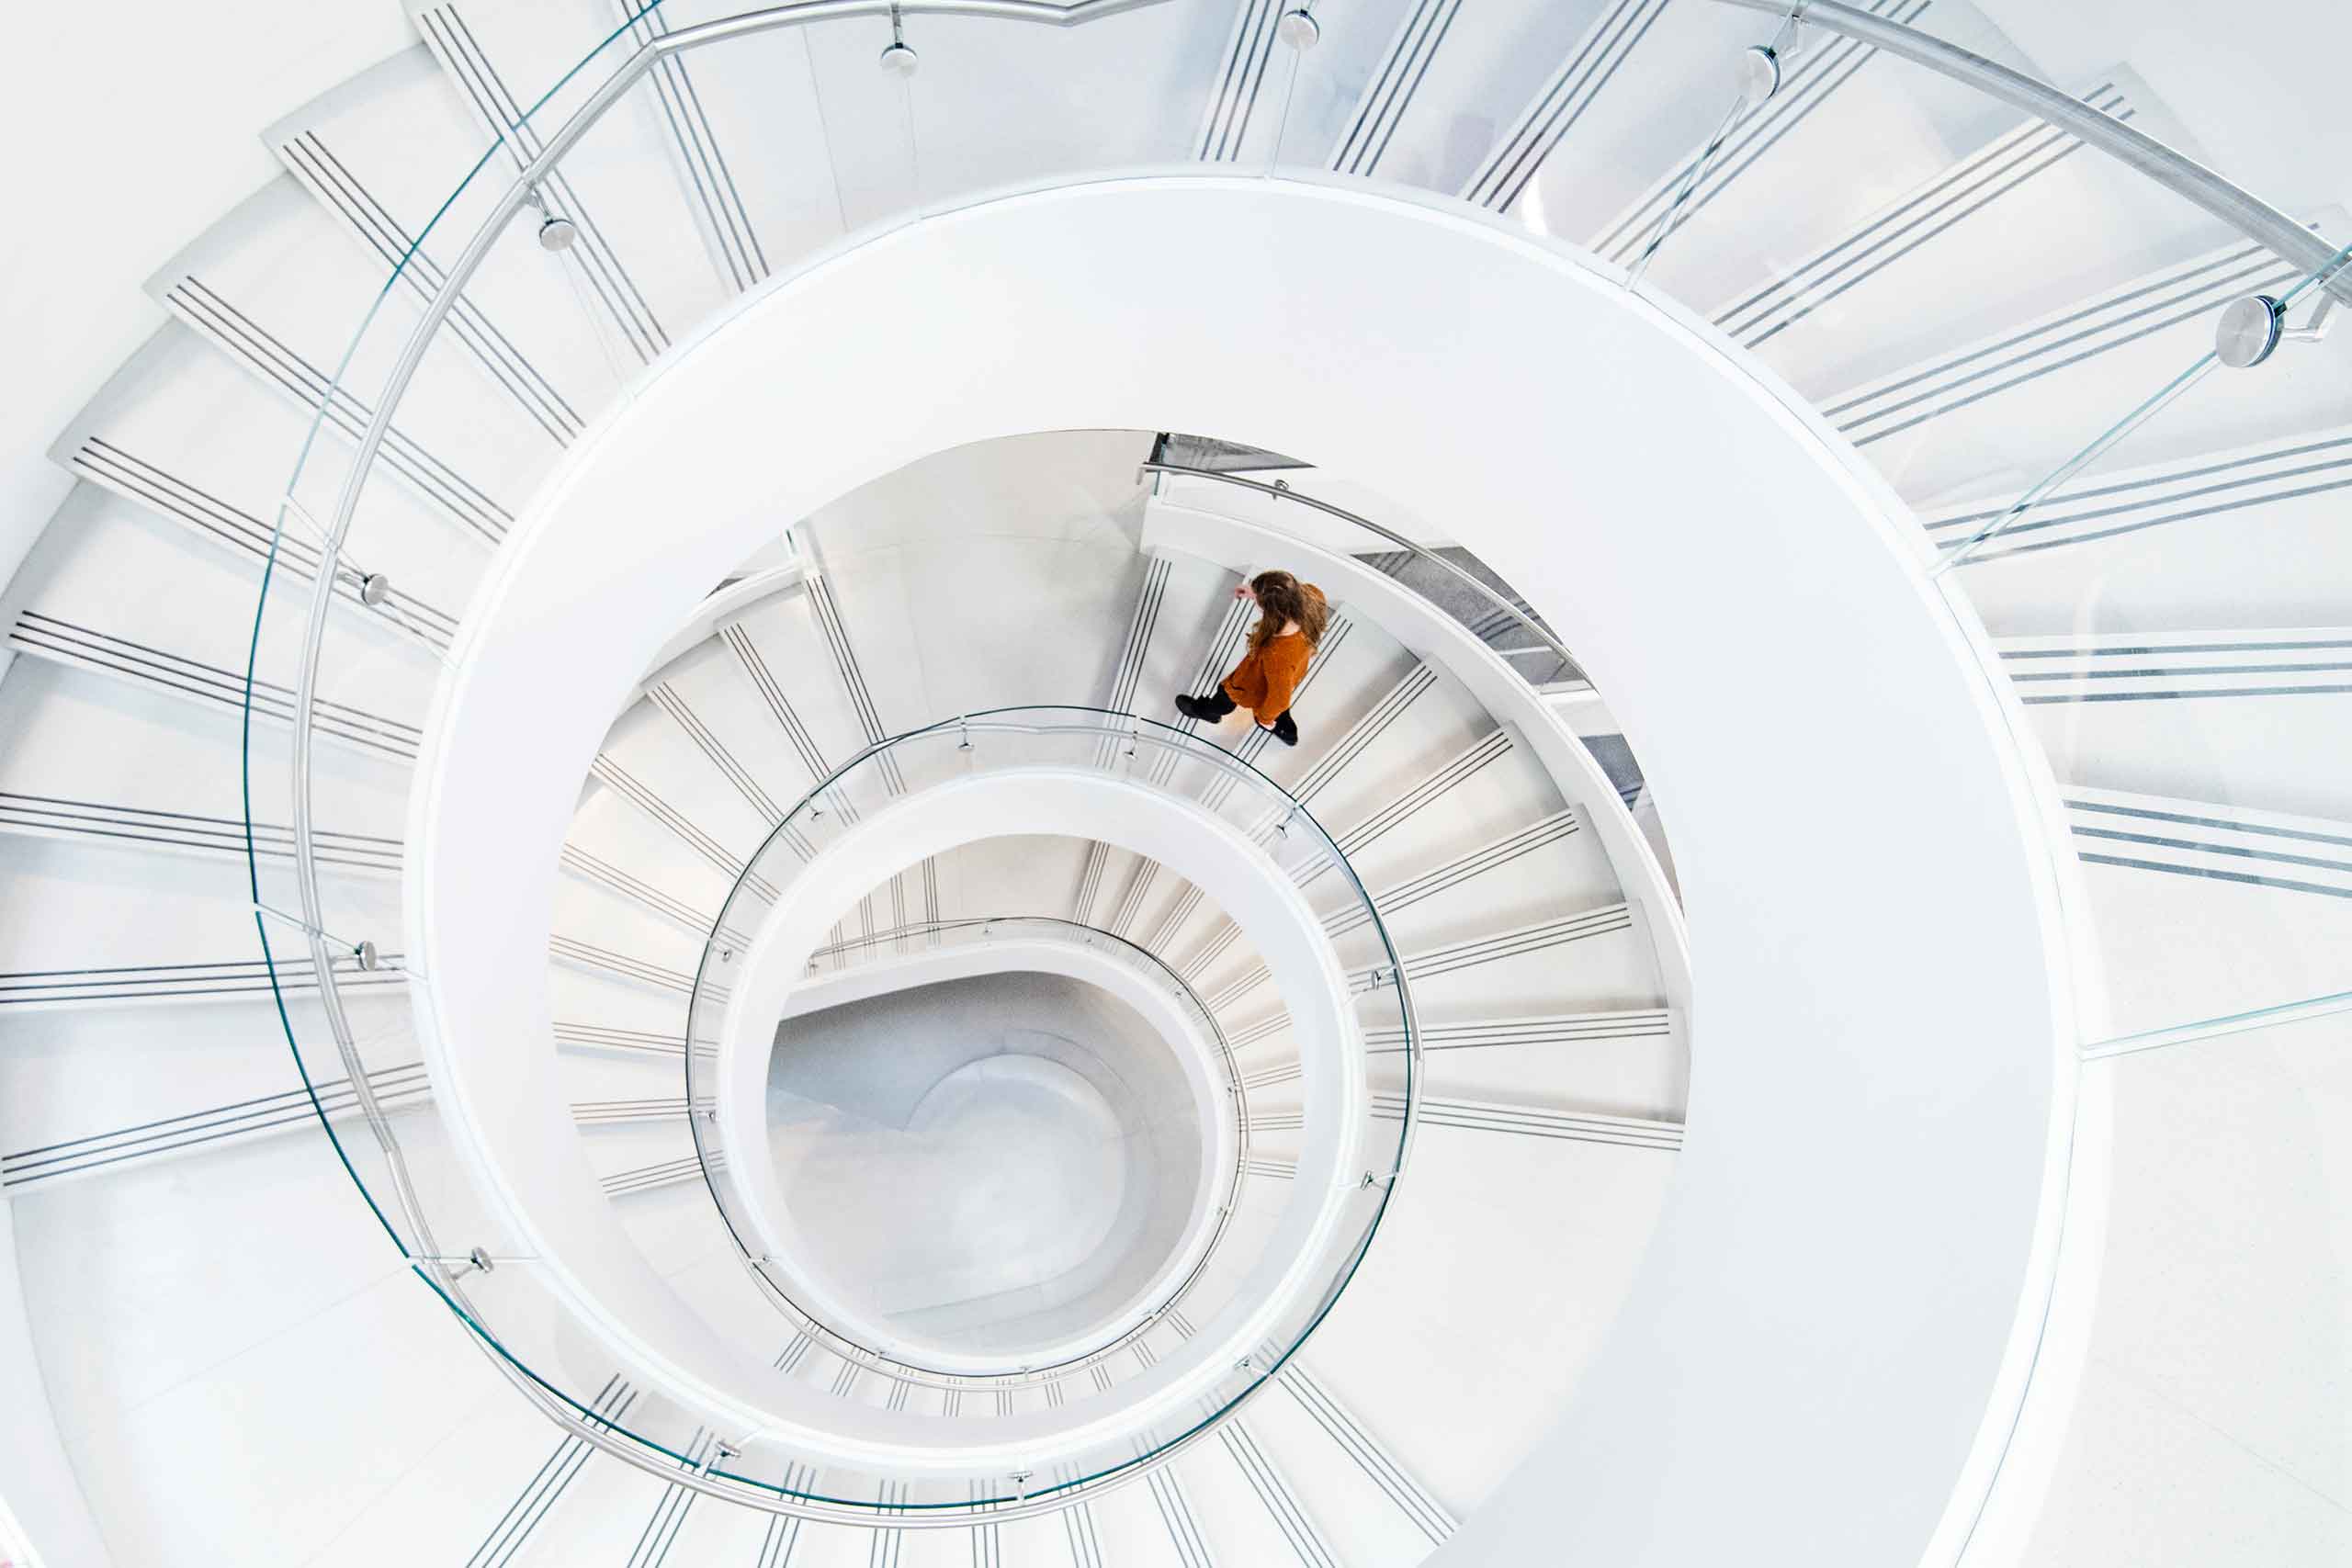 a view looking down at ISEC's spiral staircase